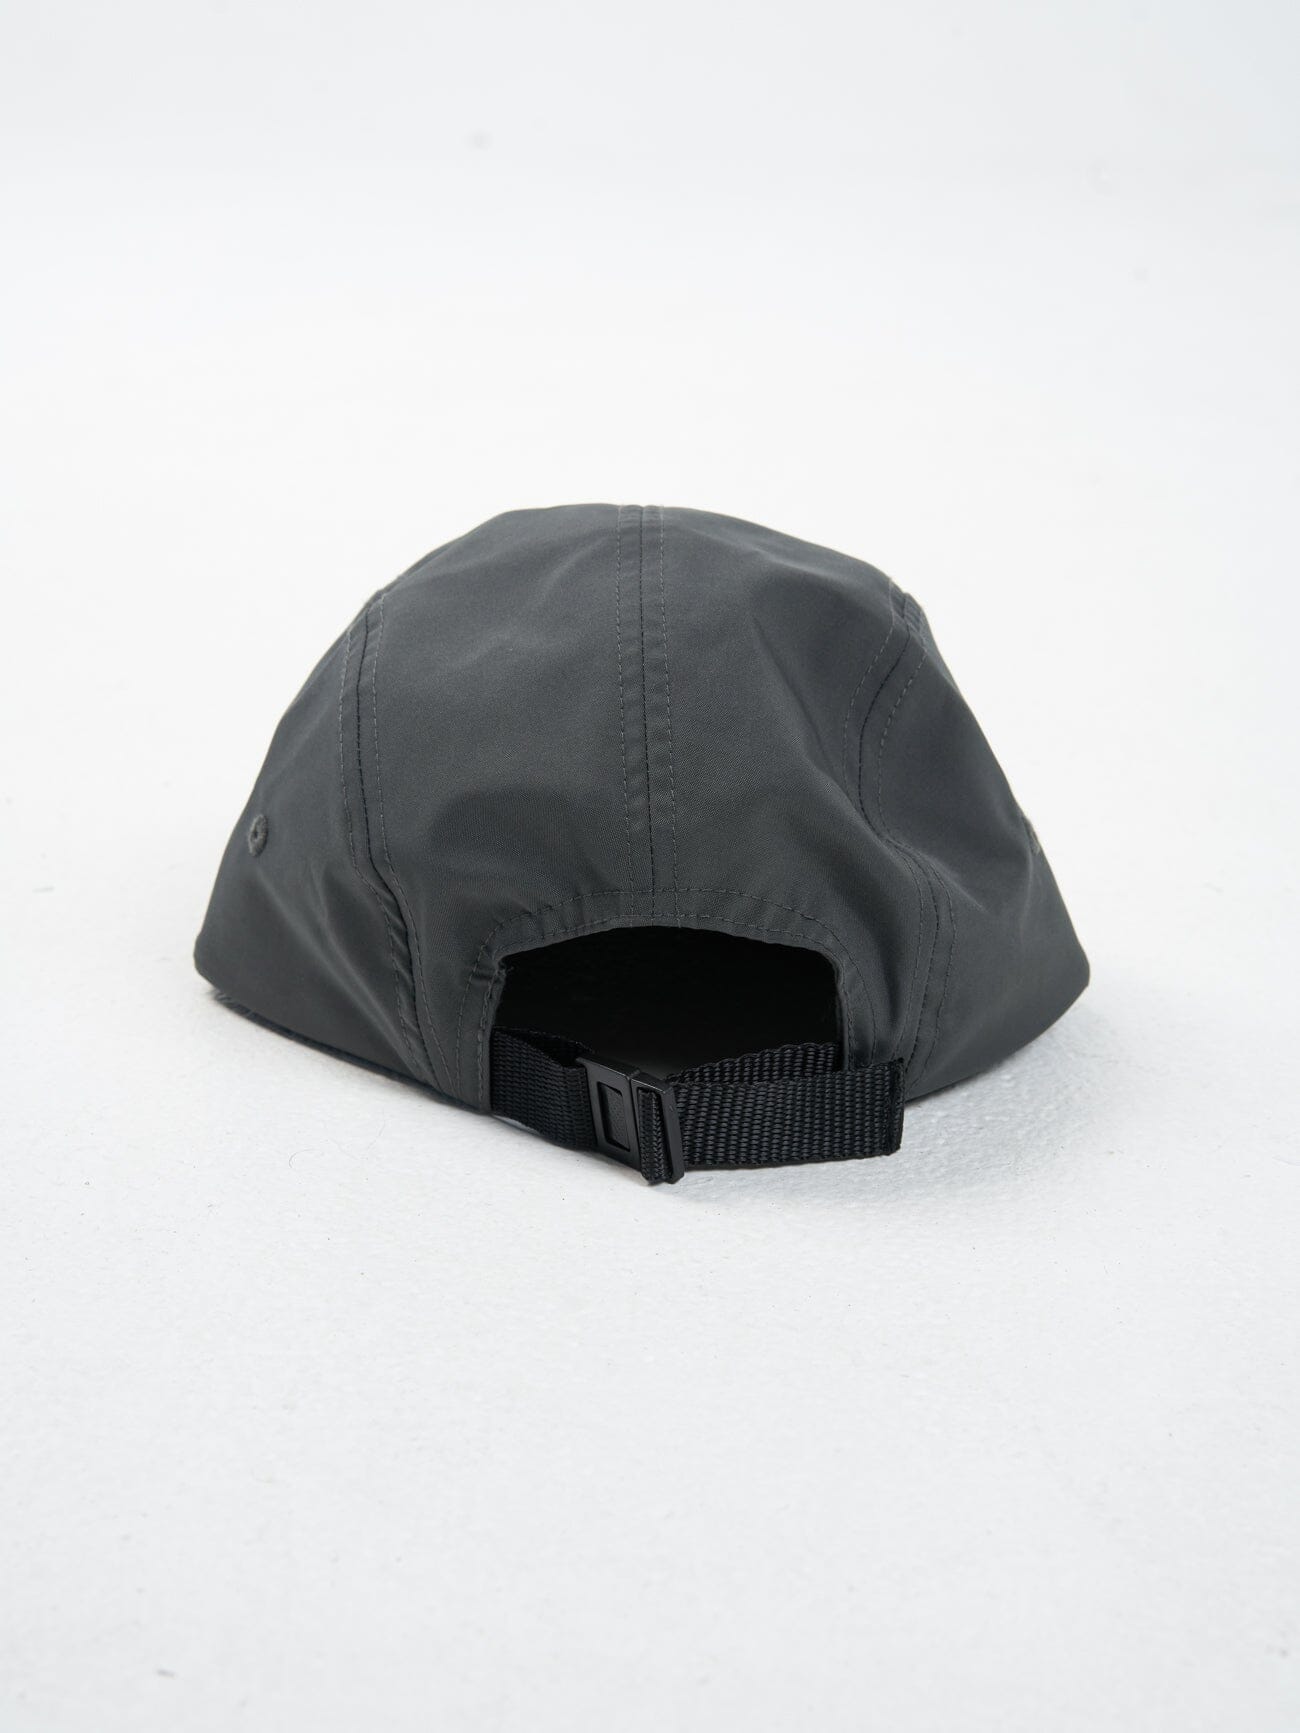 Spectral Curved 5 Panel Cap - Dark Charcoal